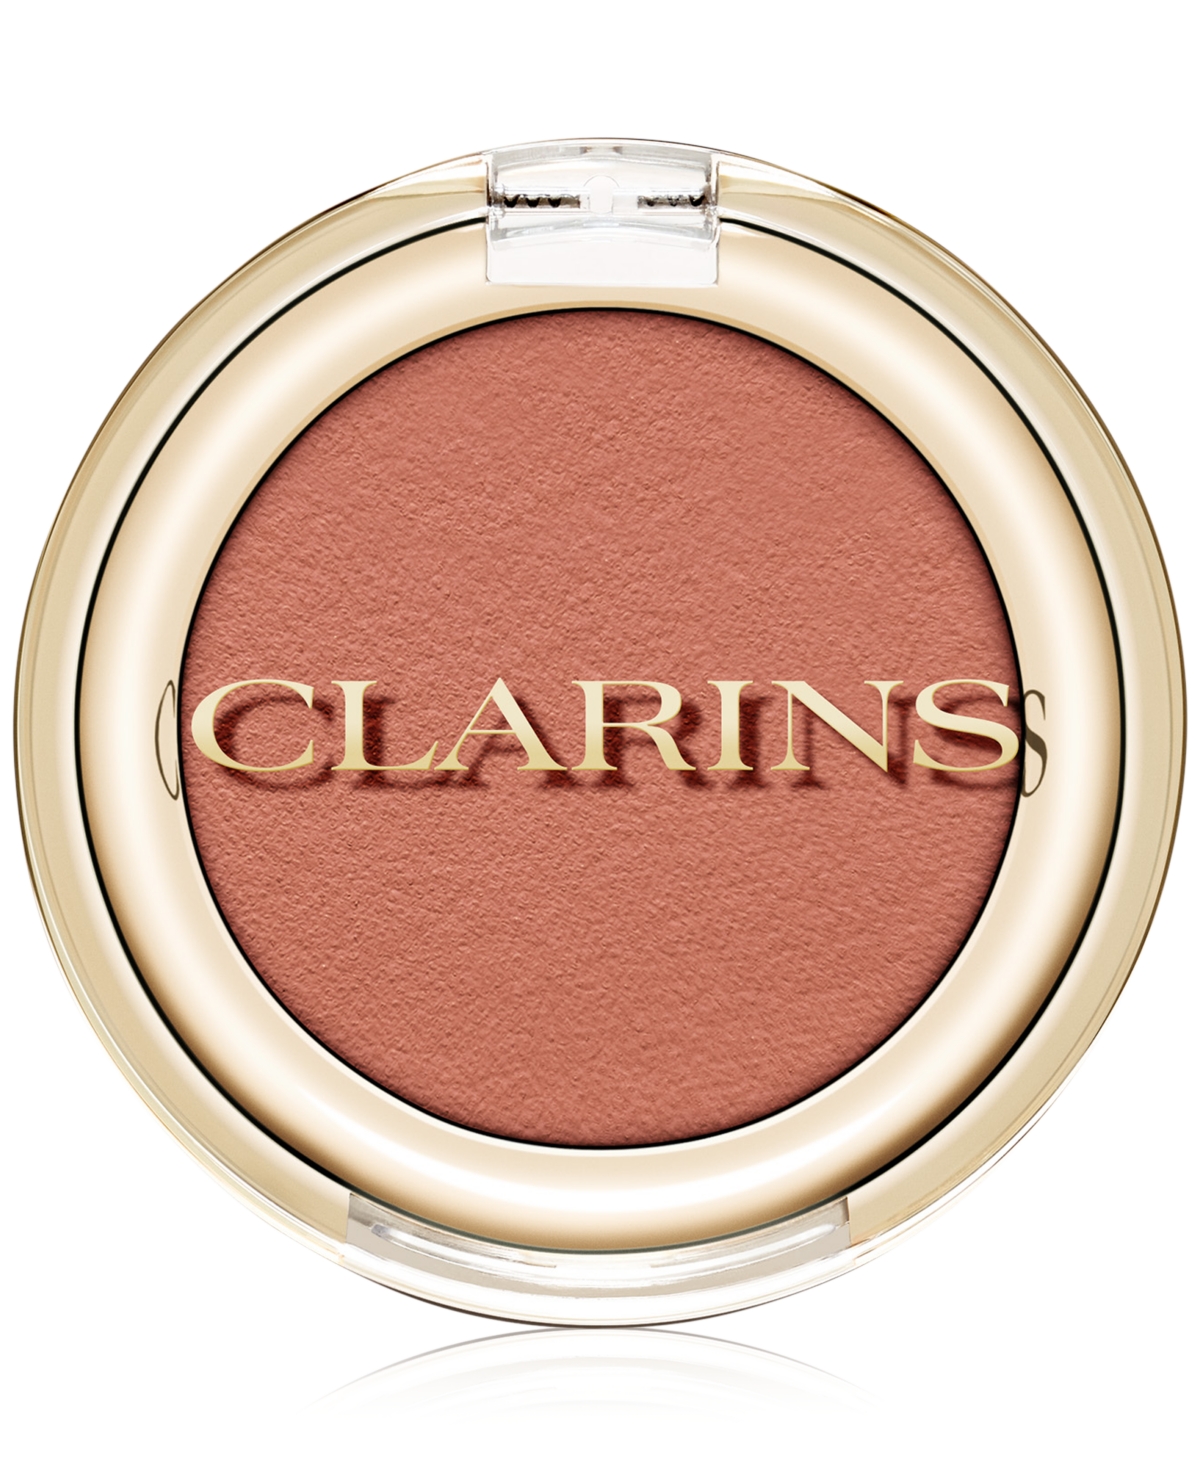 Clarins Ombre Skin Highly Pigmented & Crease-proof Eyeshadow In Matte Rosewood